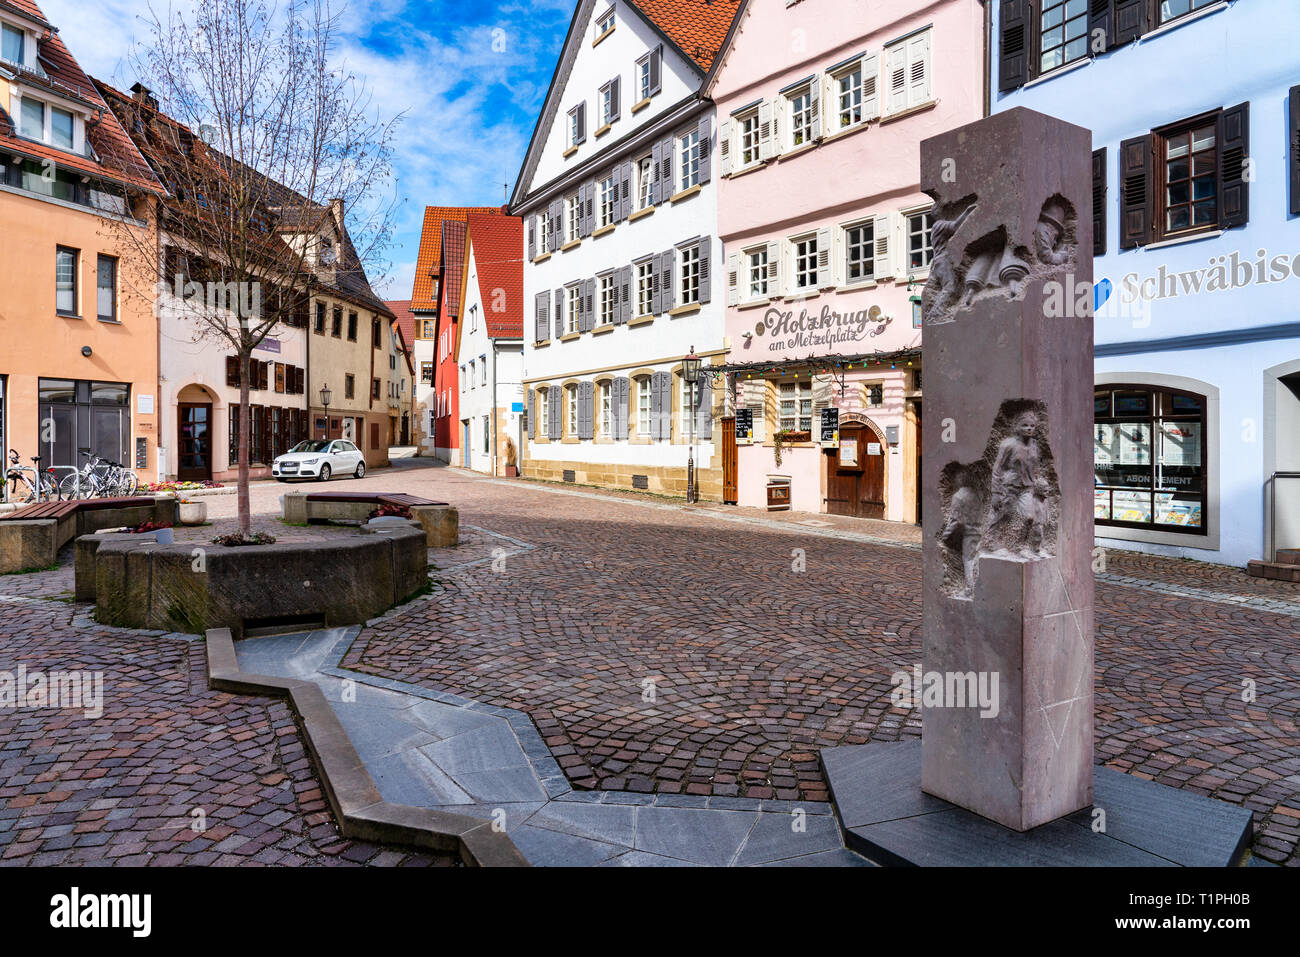 Rottenburg, Germany, 03/16/2019: City centre of Rottenburg with memorial stone to commemorate the Jewish history in Rottenburg Stock Photo